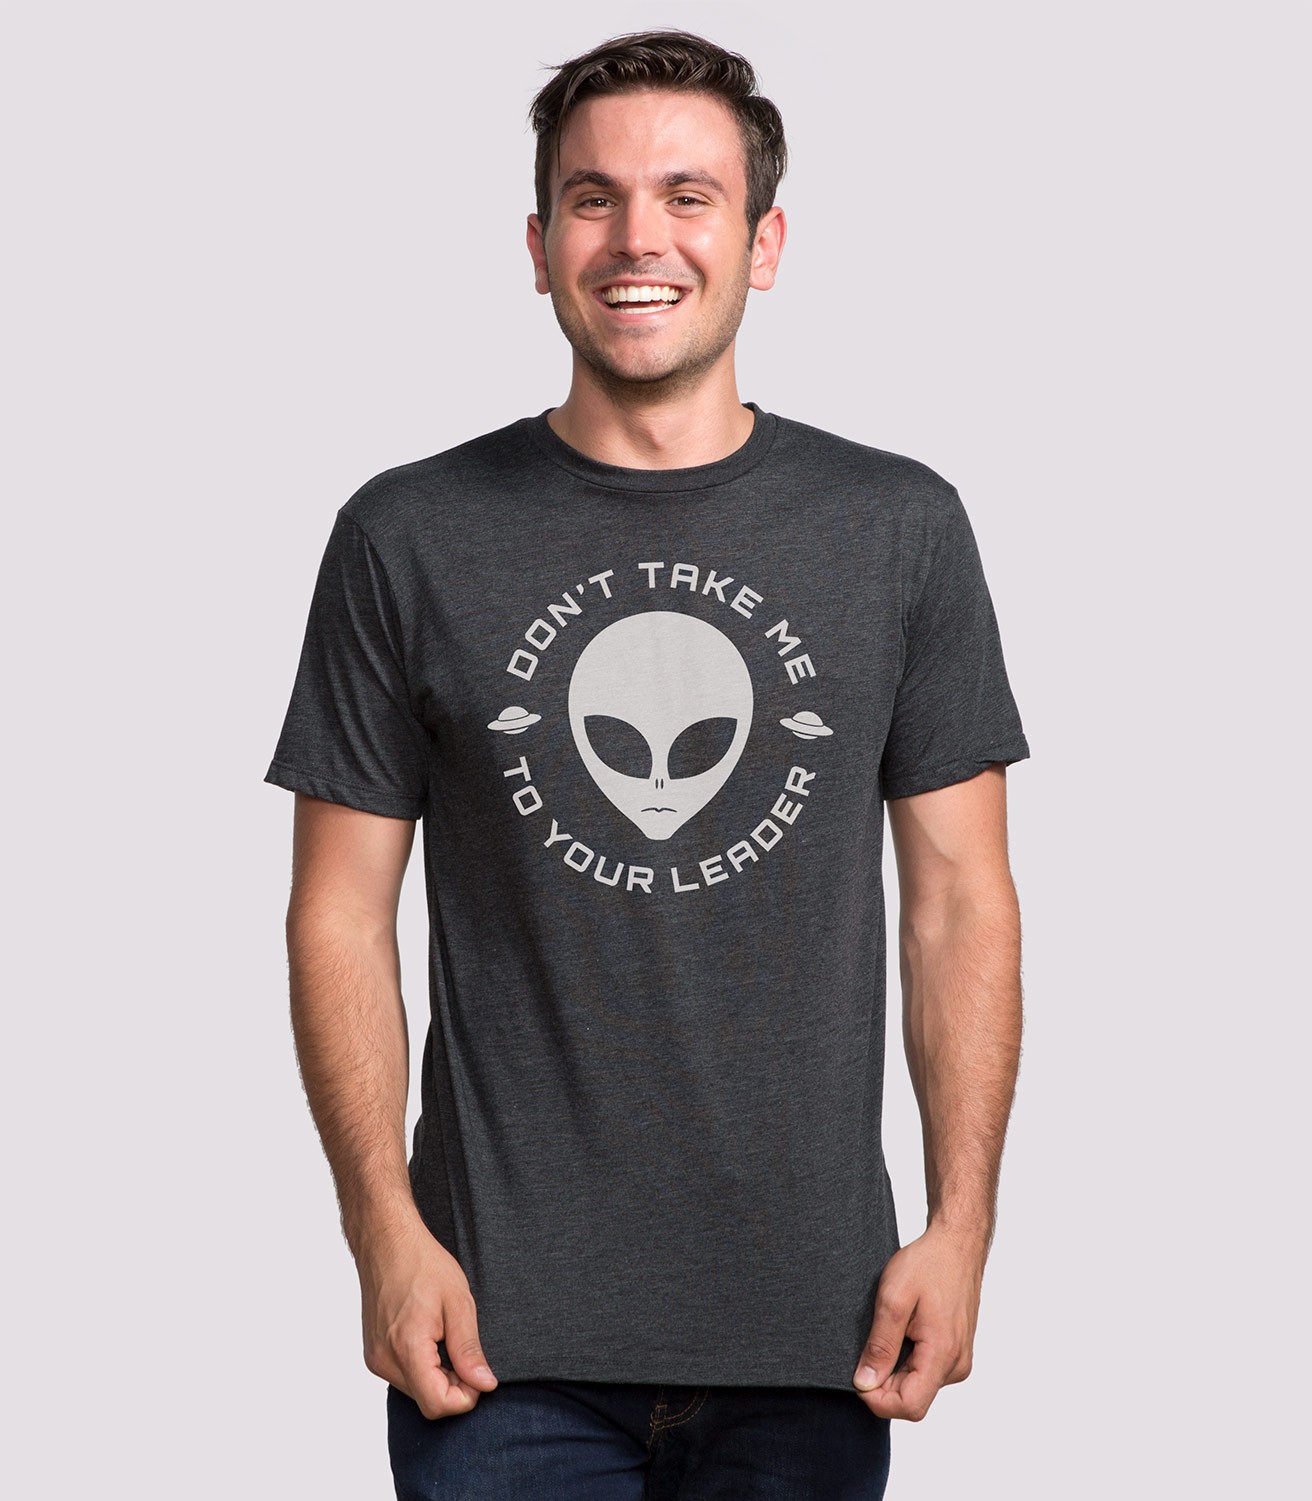 Don't Take Me To Your Leader Men's Funny T-Shirt | Headline Shirts